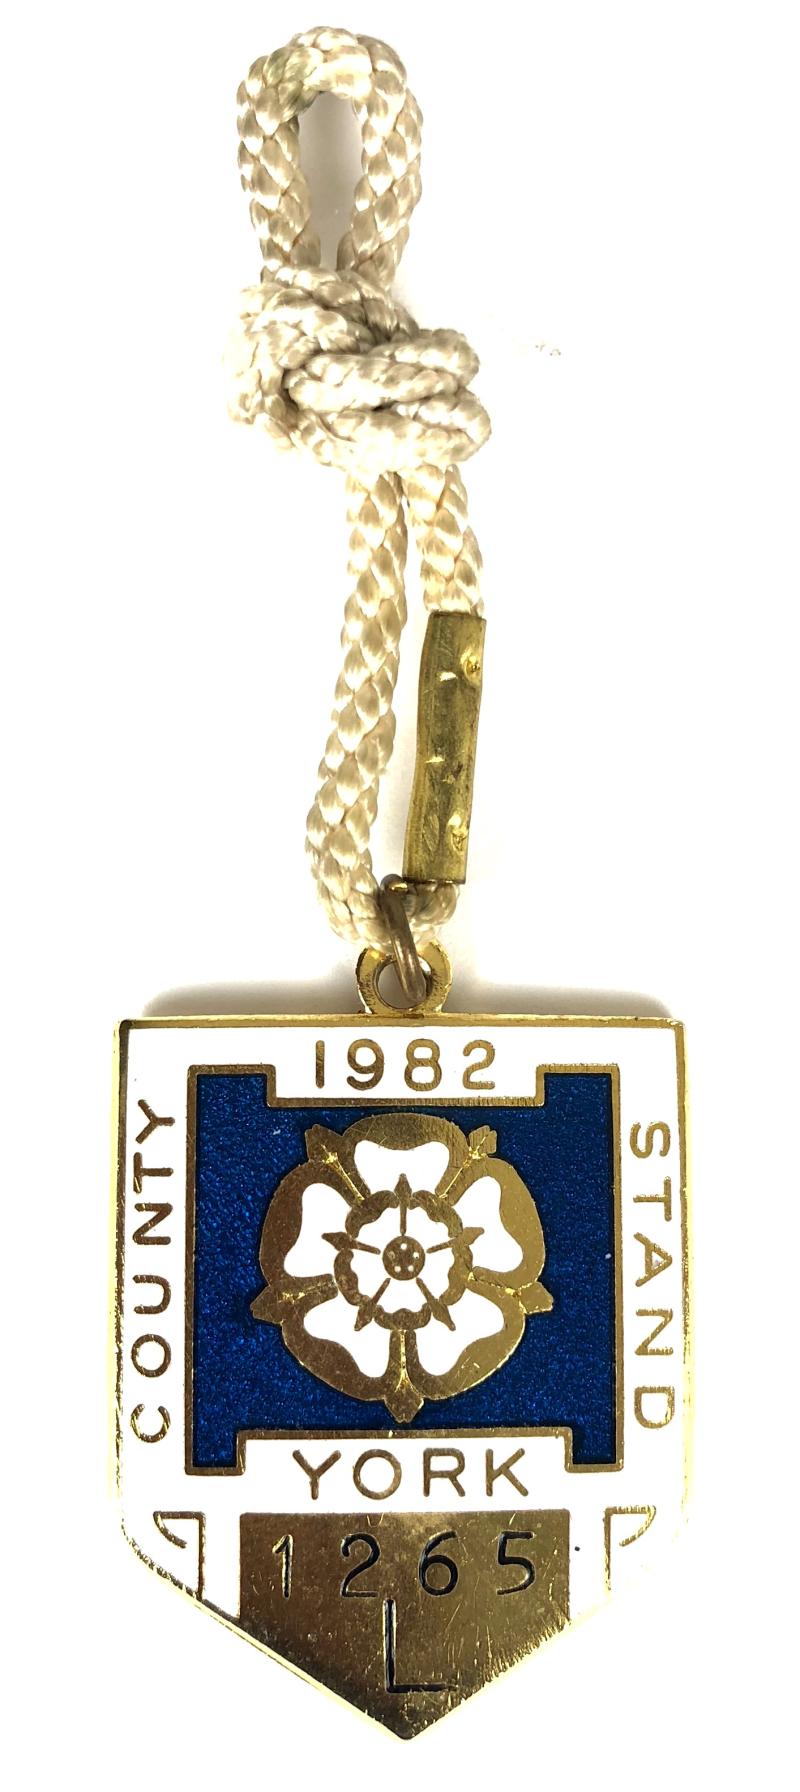 York County Stand 1982 horse racing club badge